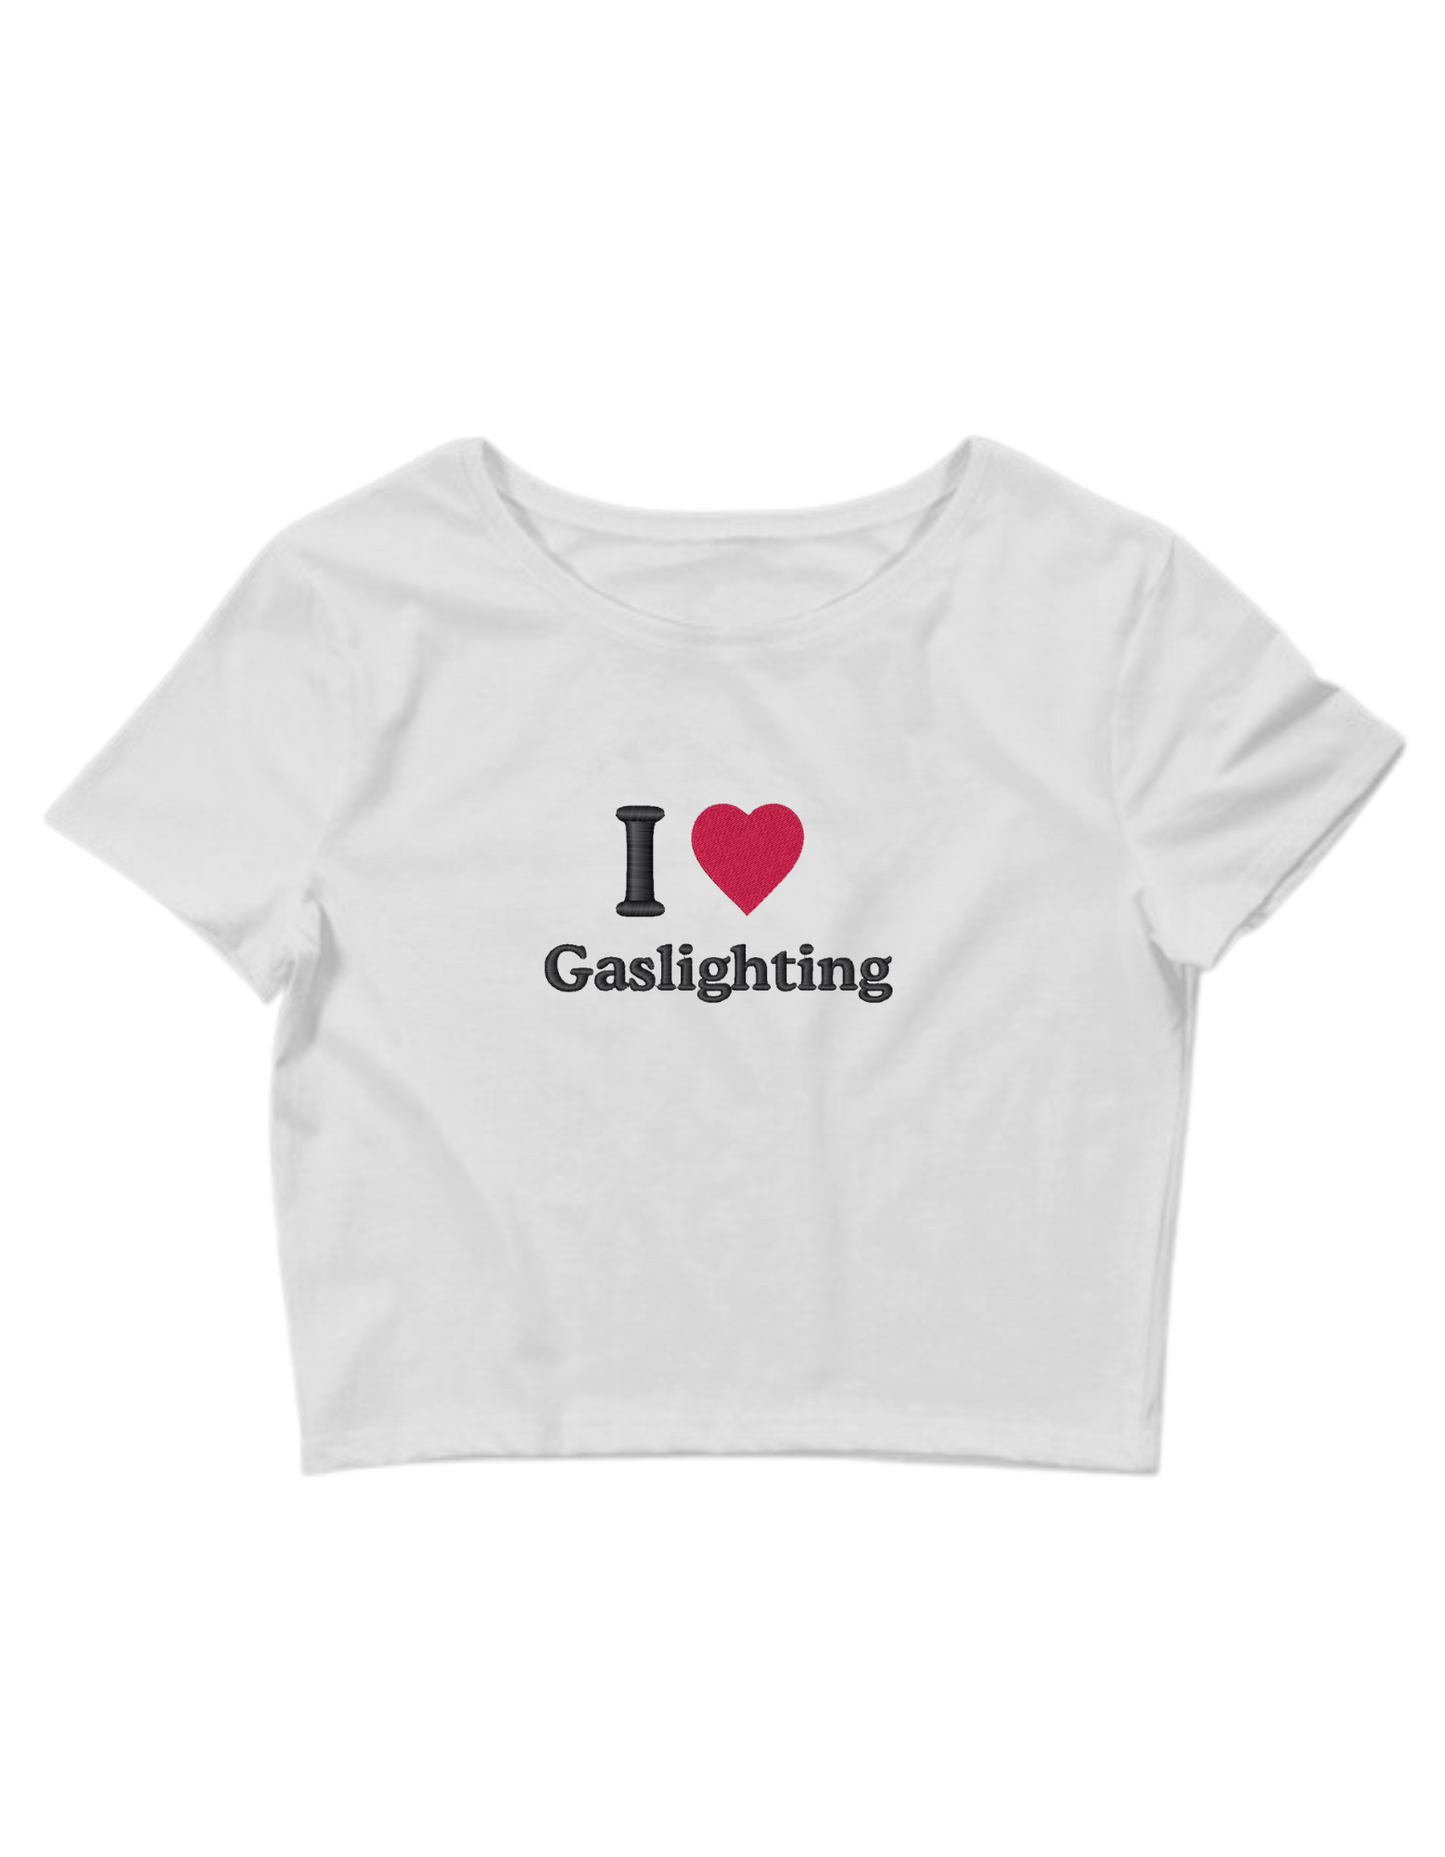 Embroidered ‘I HEART Gaslighting’ Cropped, Short Sleeve, Petite fit, Adult, Female, T-Shirt